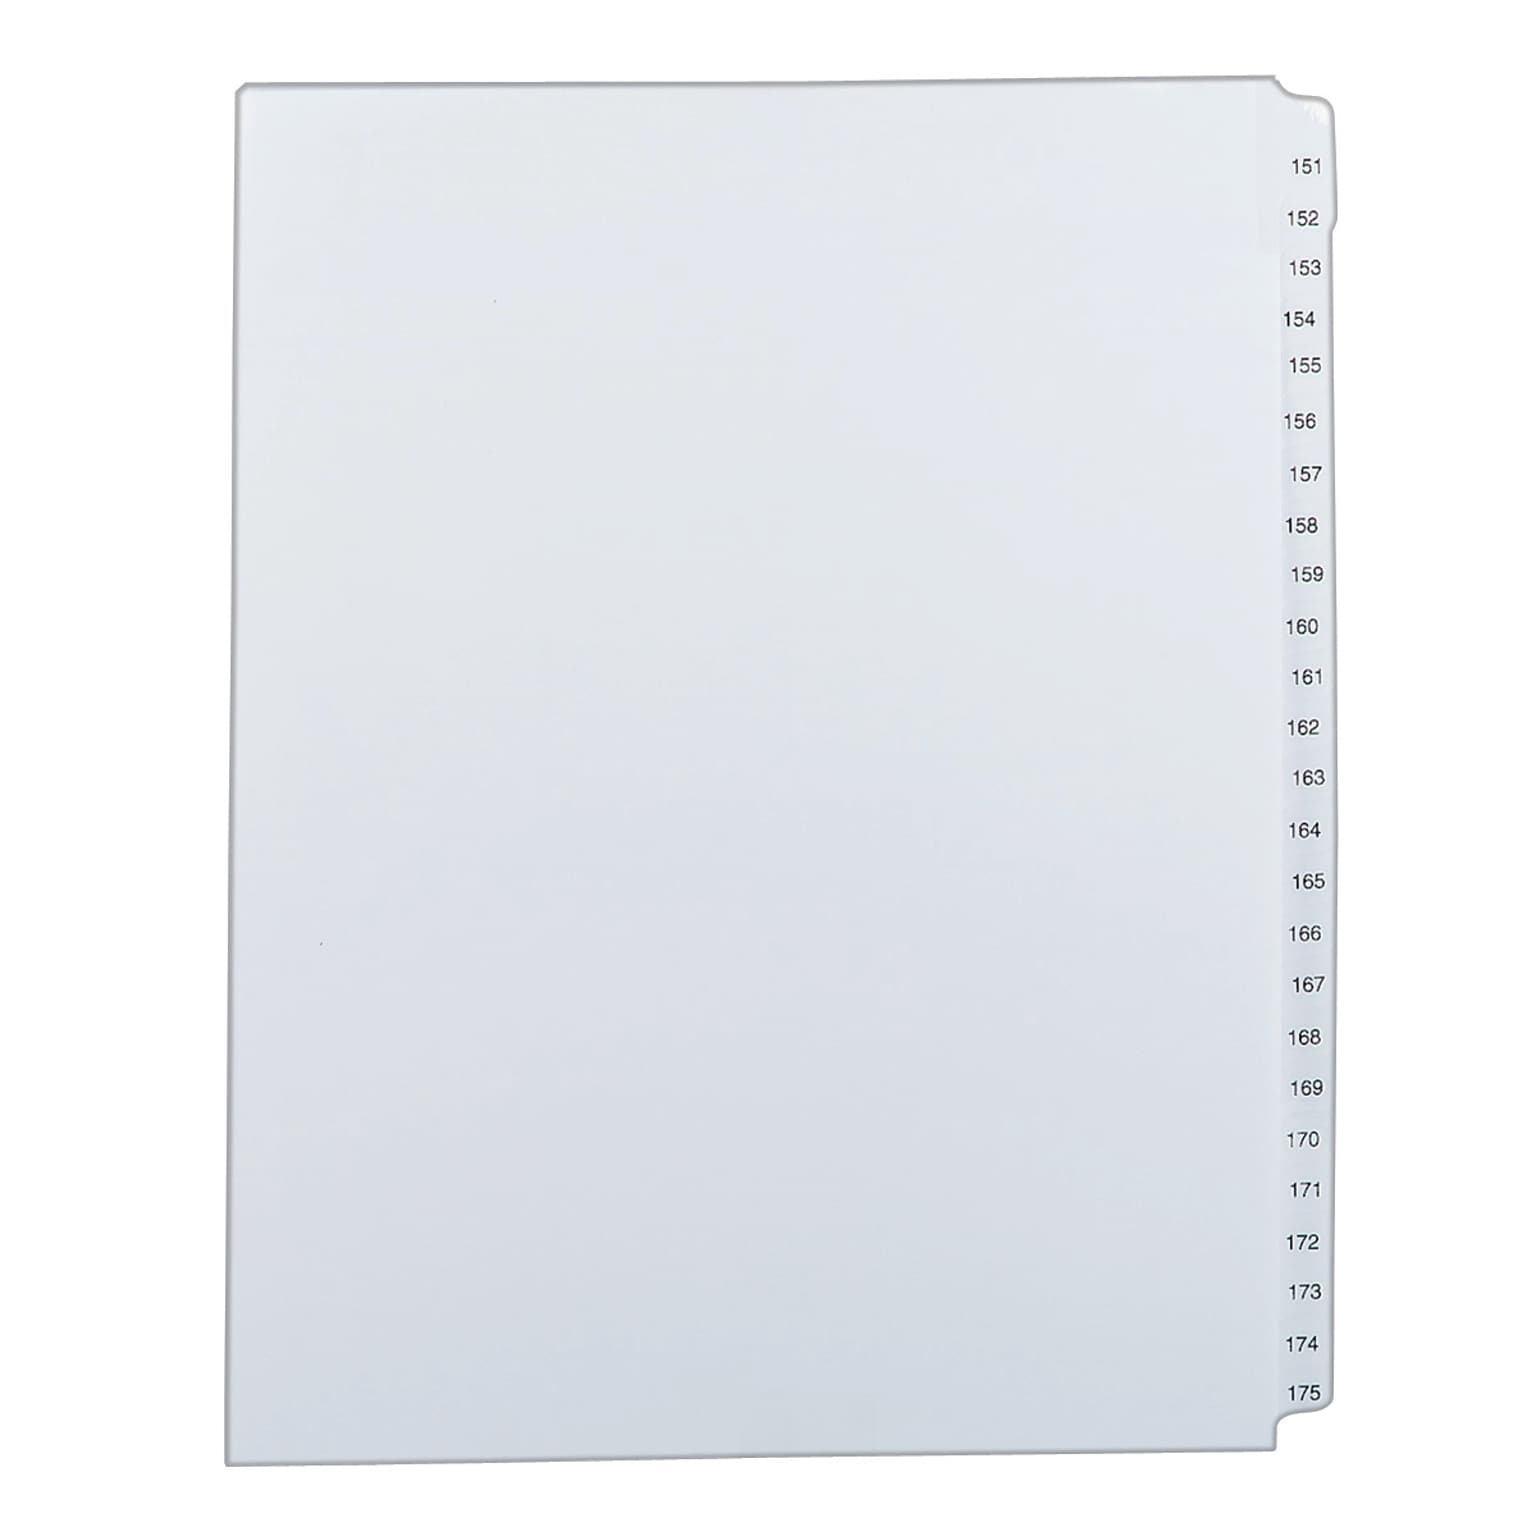 Avery Style Allstate Pre-Printed Paper Divider, 25-Tab, White, Set (82189)